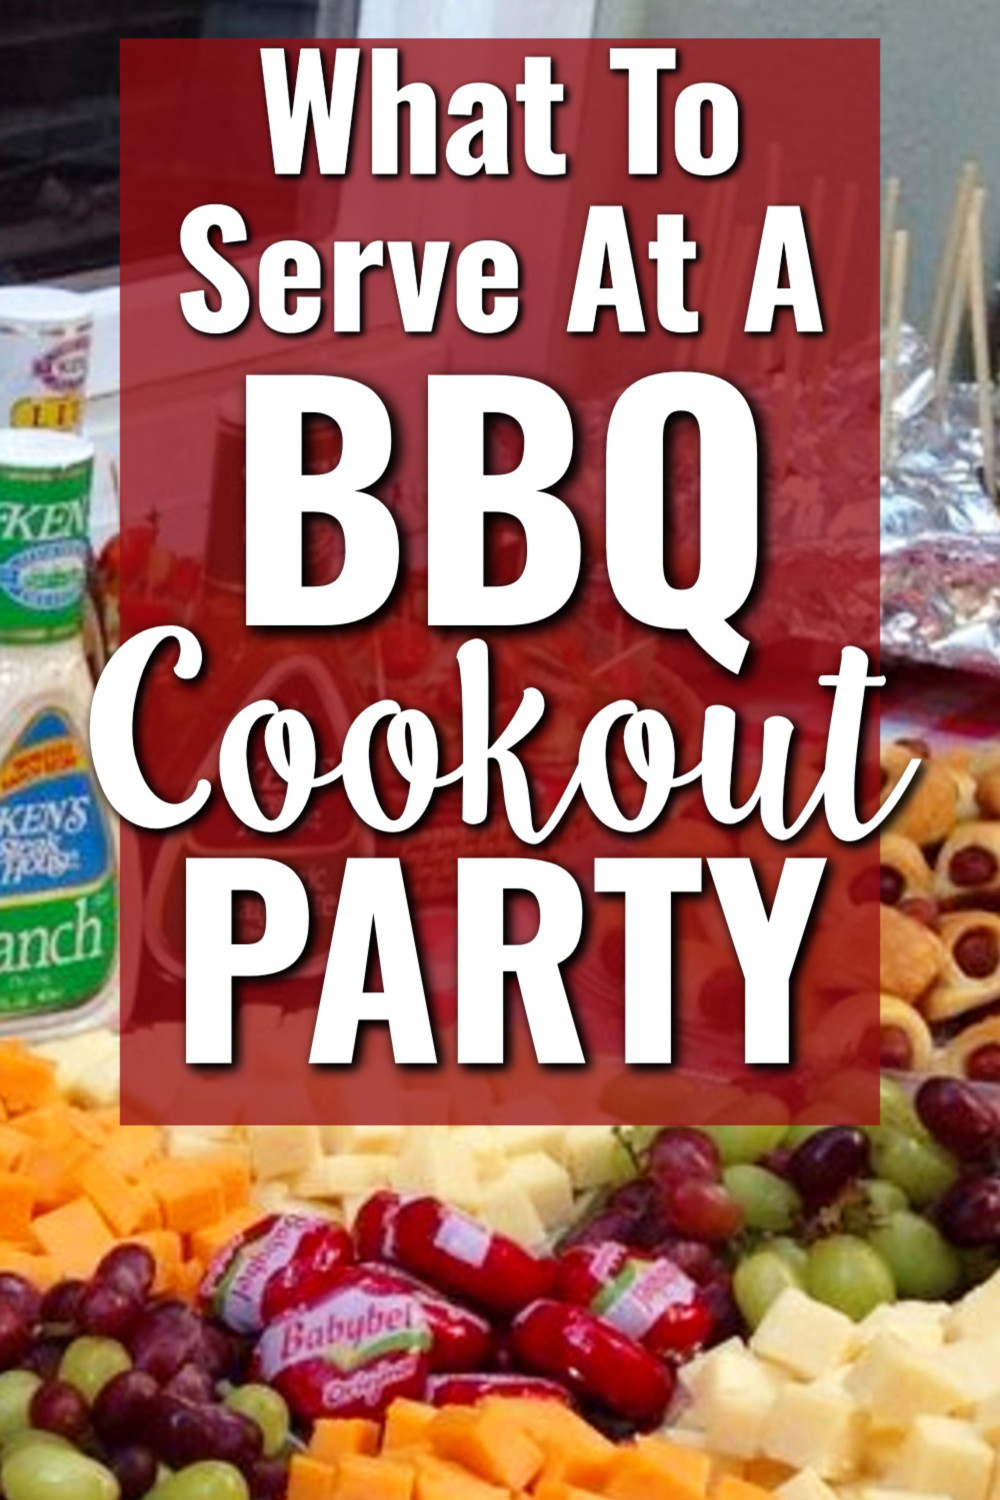 What to serve at a BBQ cookout party